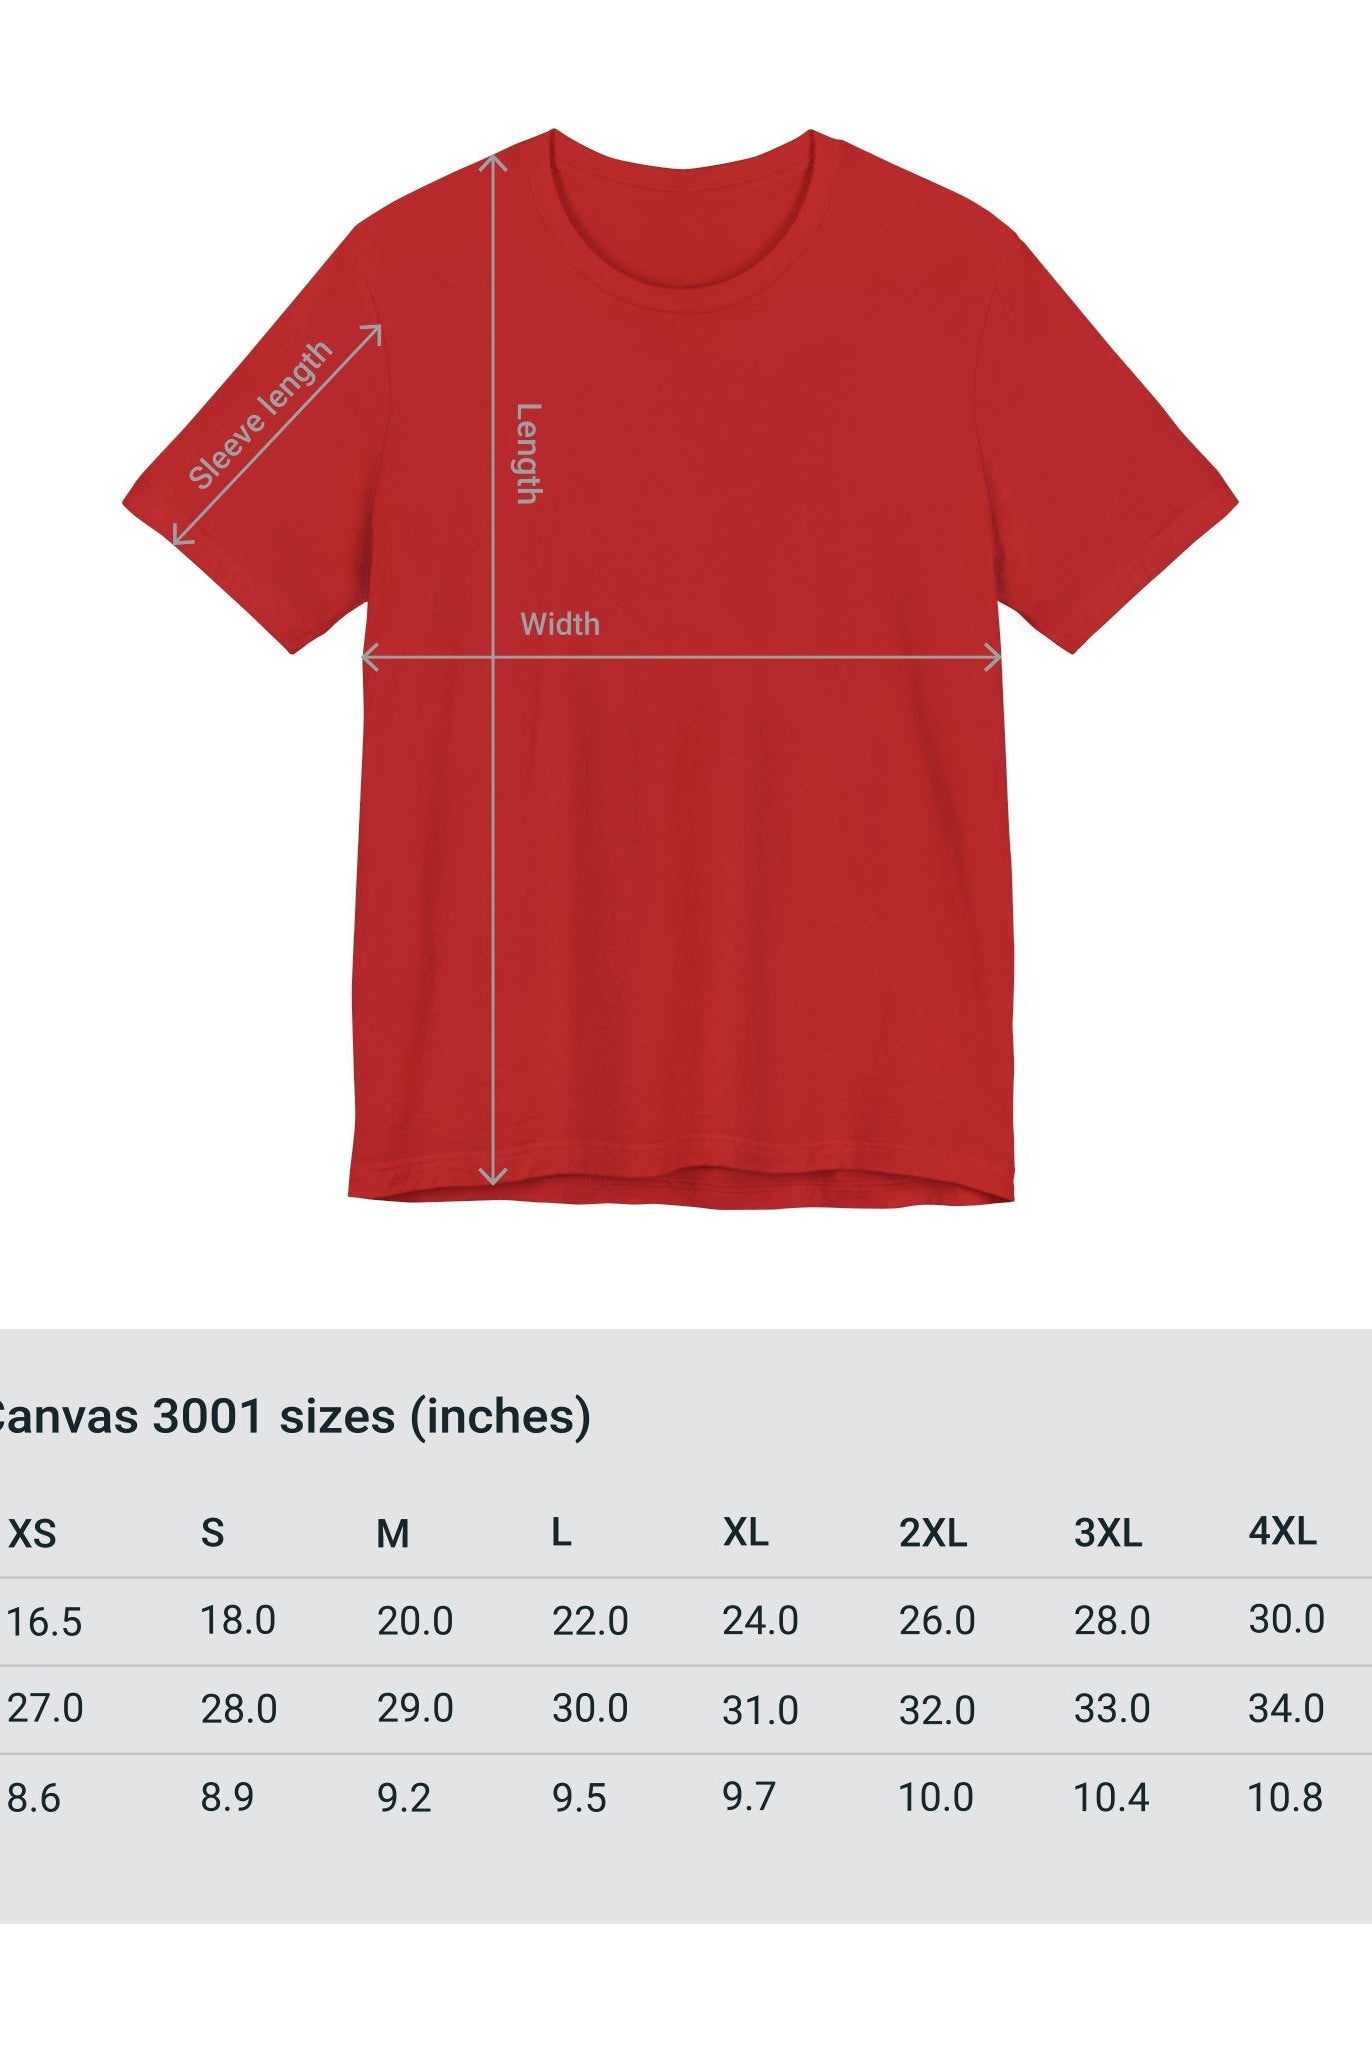 Red t-shirt with size measurements, Adventure Unlimited Surfing T-Shirt printed on Bella & Canvas EU item